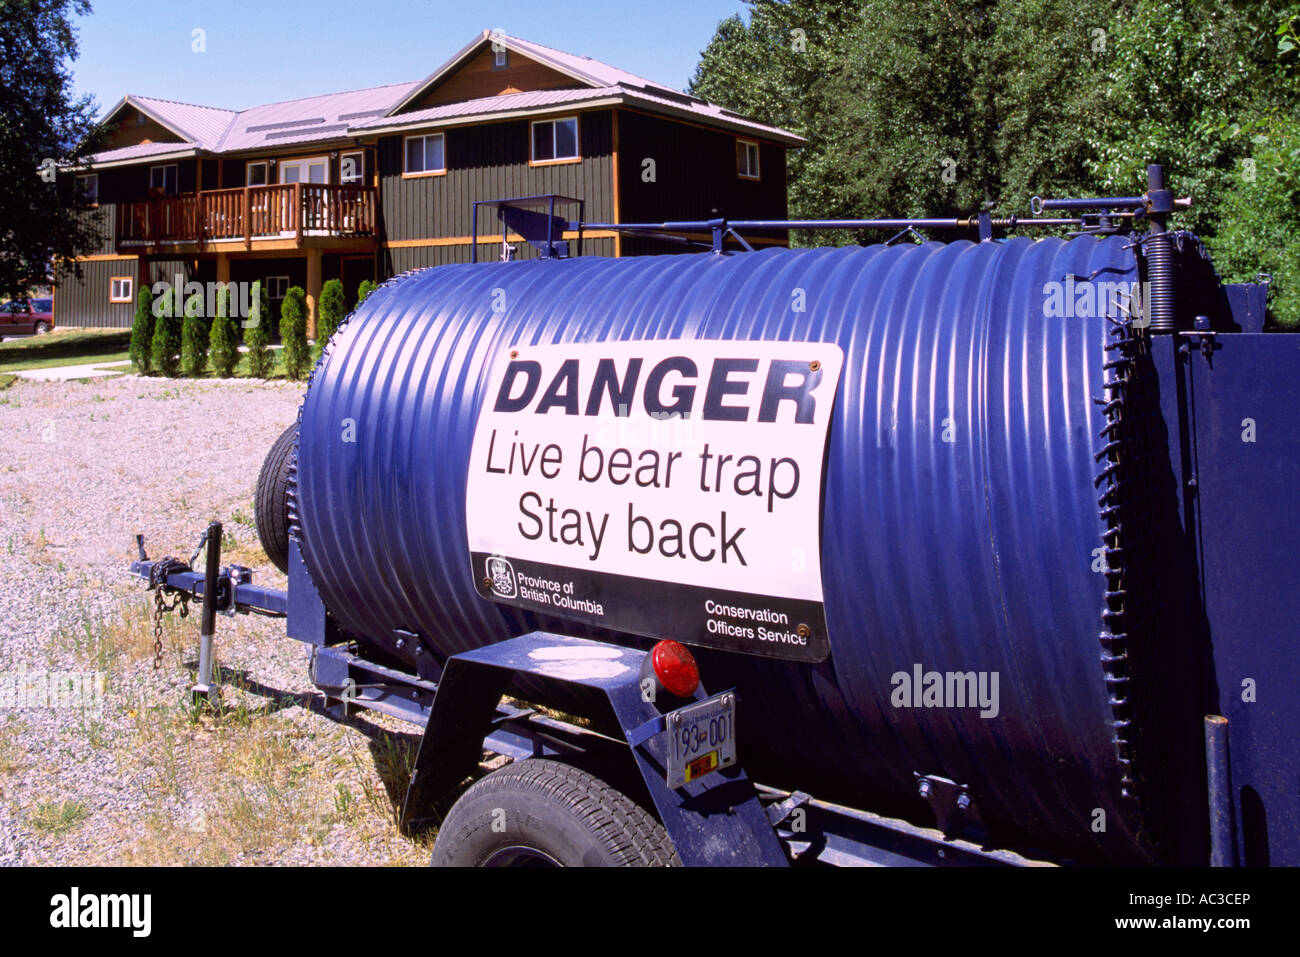 A Live Bear Trap located in front of a House in British Columbia, Canada - Wildlife Conservation and Public Safety Stock Photo